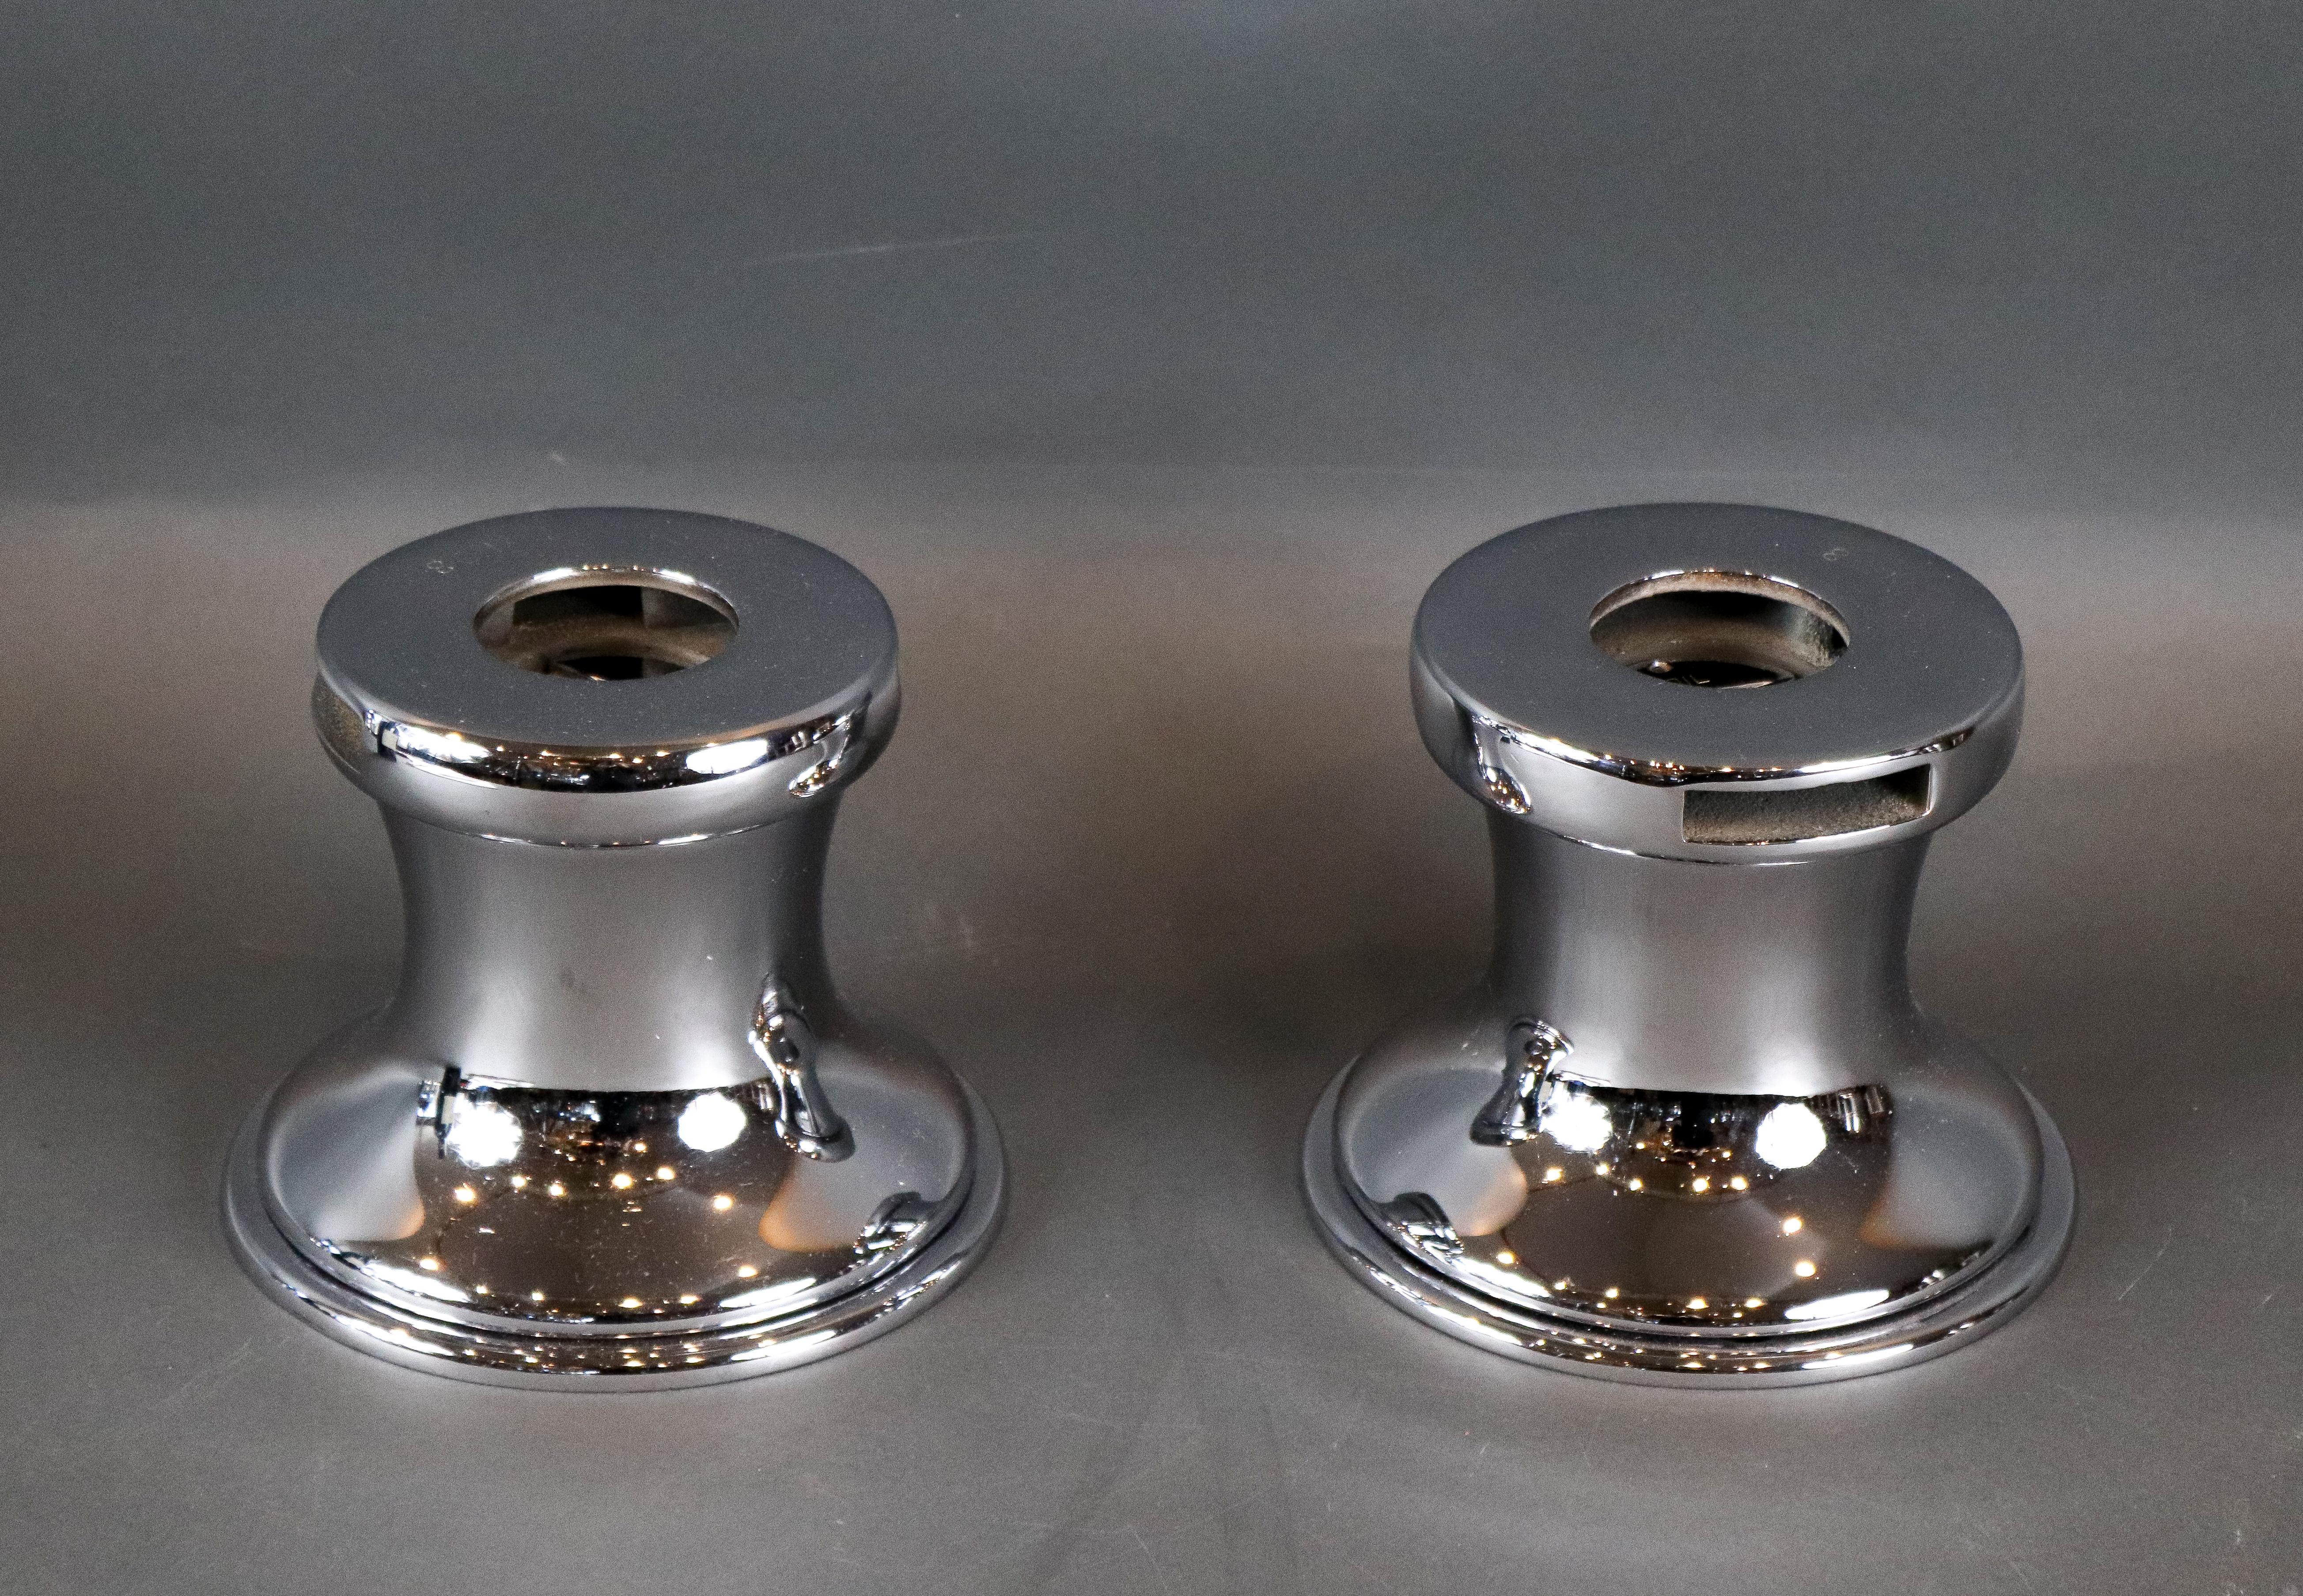 Highly polished pair of winches with internal gears. 5